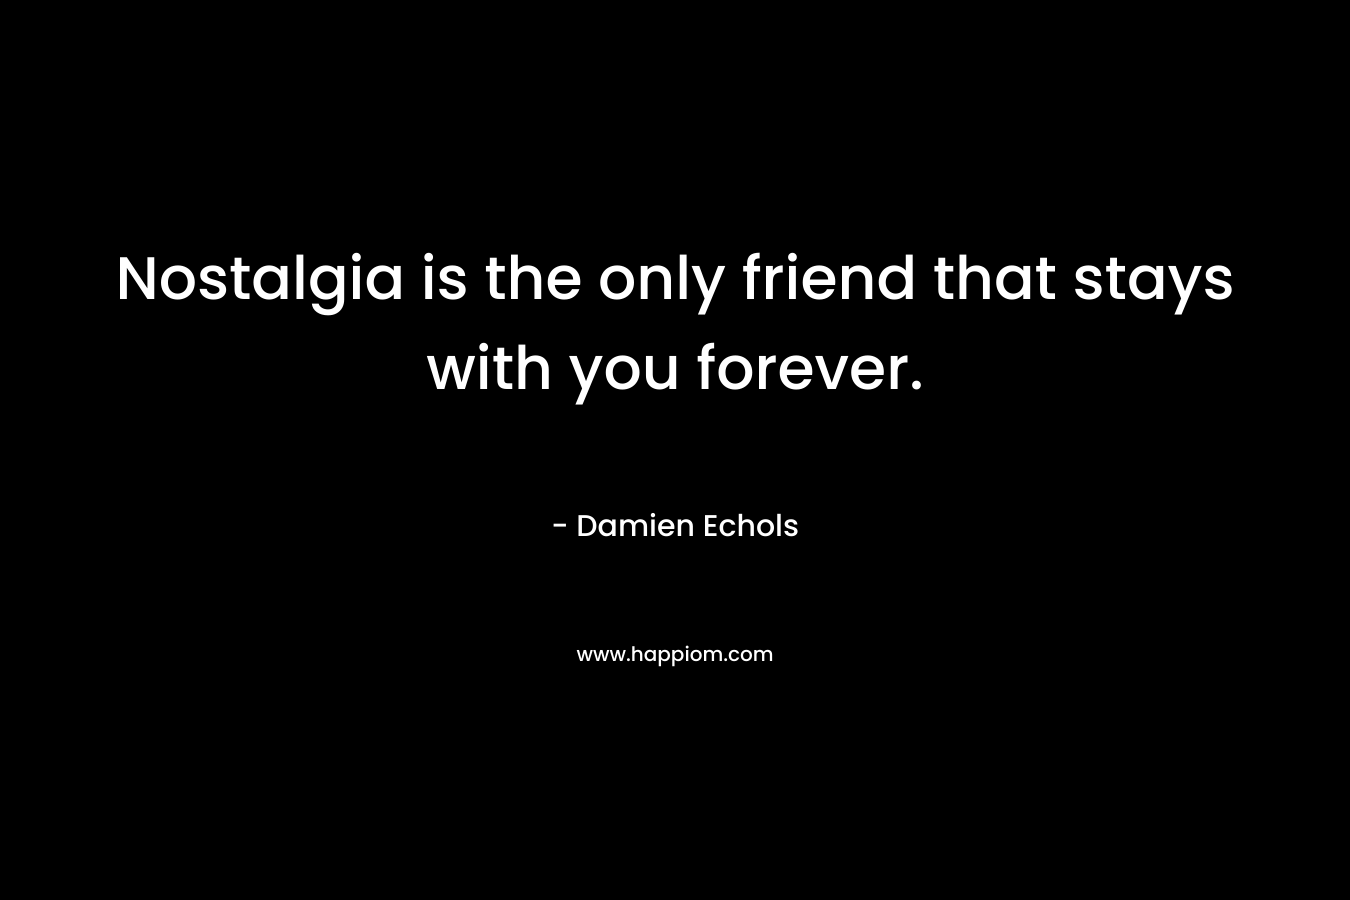 Nostalgia is the only friend that stays with you forever. – Damien Echols